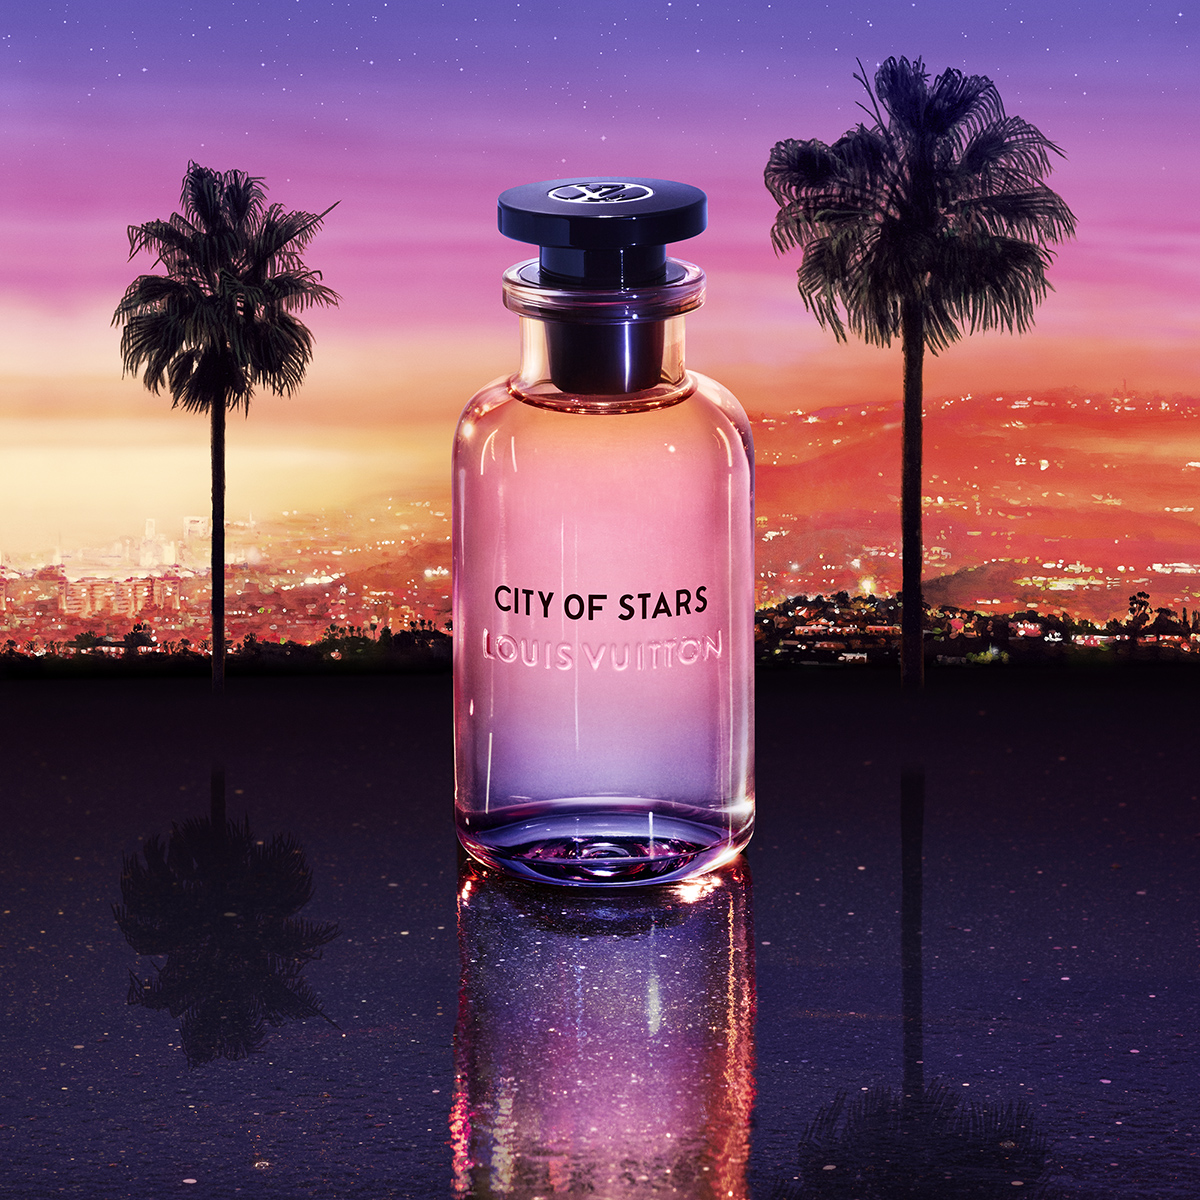 Louis Vuitton on X: Introducing City of Stars. The Evening Cologne Perfume  by #LouisVuitton Master Perfumer Jacques Cavallier Belletrud conveys a  nocturnal fantasy through explosive citrus notes. Discover the new fragrance  and